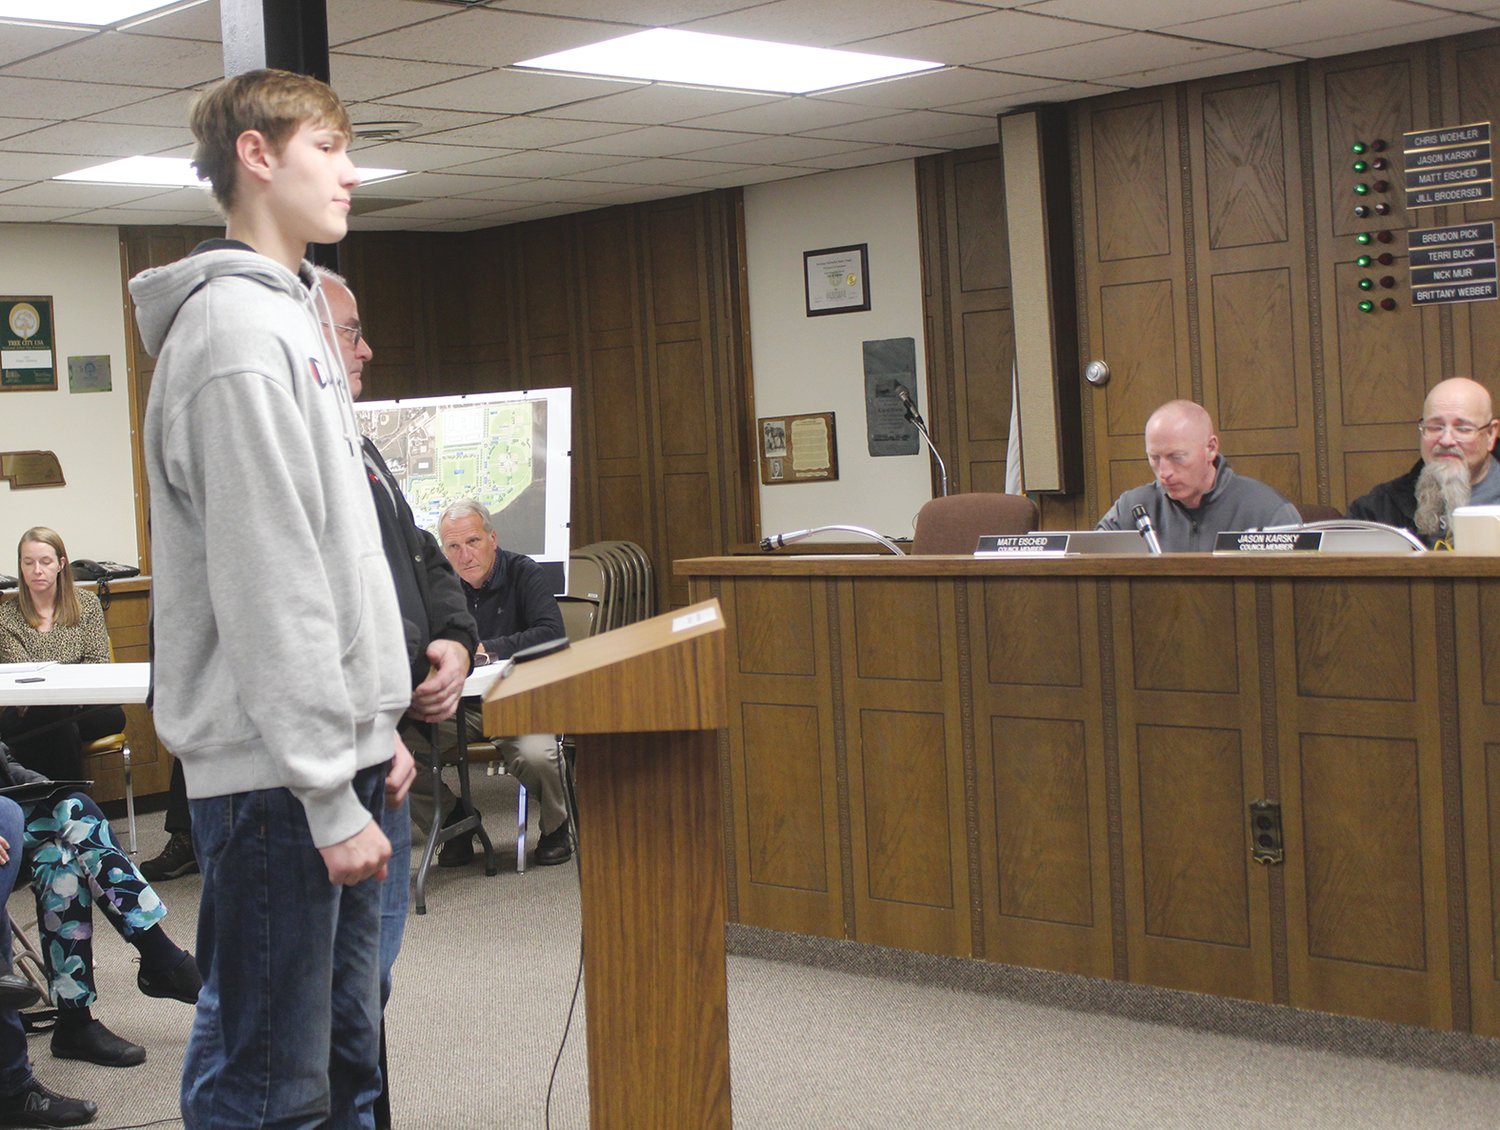 The membership of Aidan Dowling to the Wayne Volunteer Fire Department was approved by the Wayne City Council.